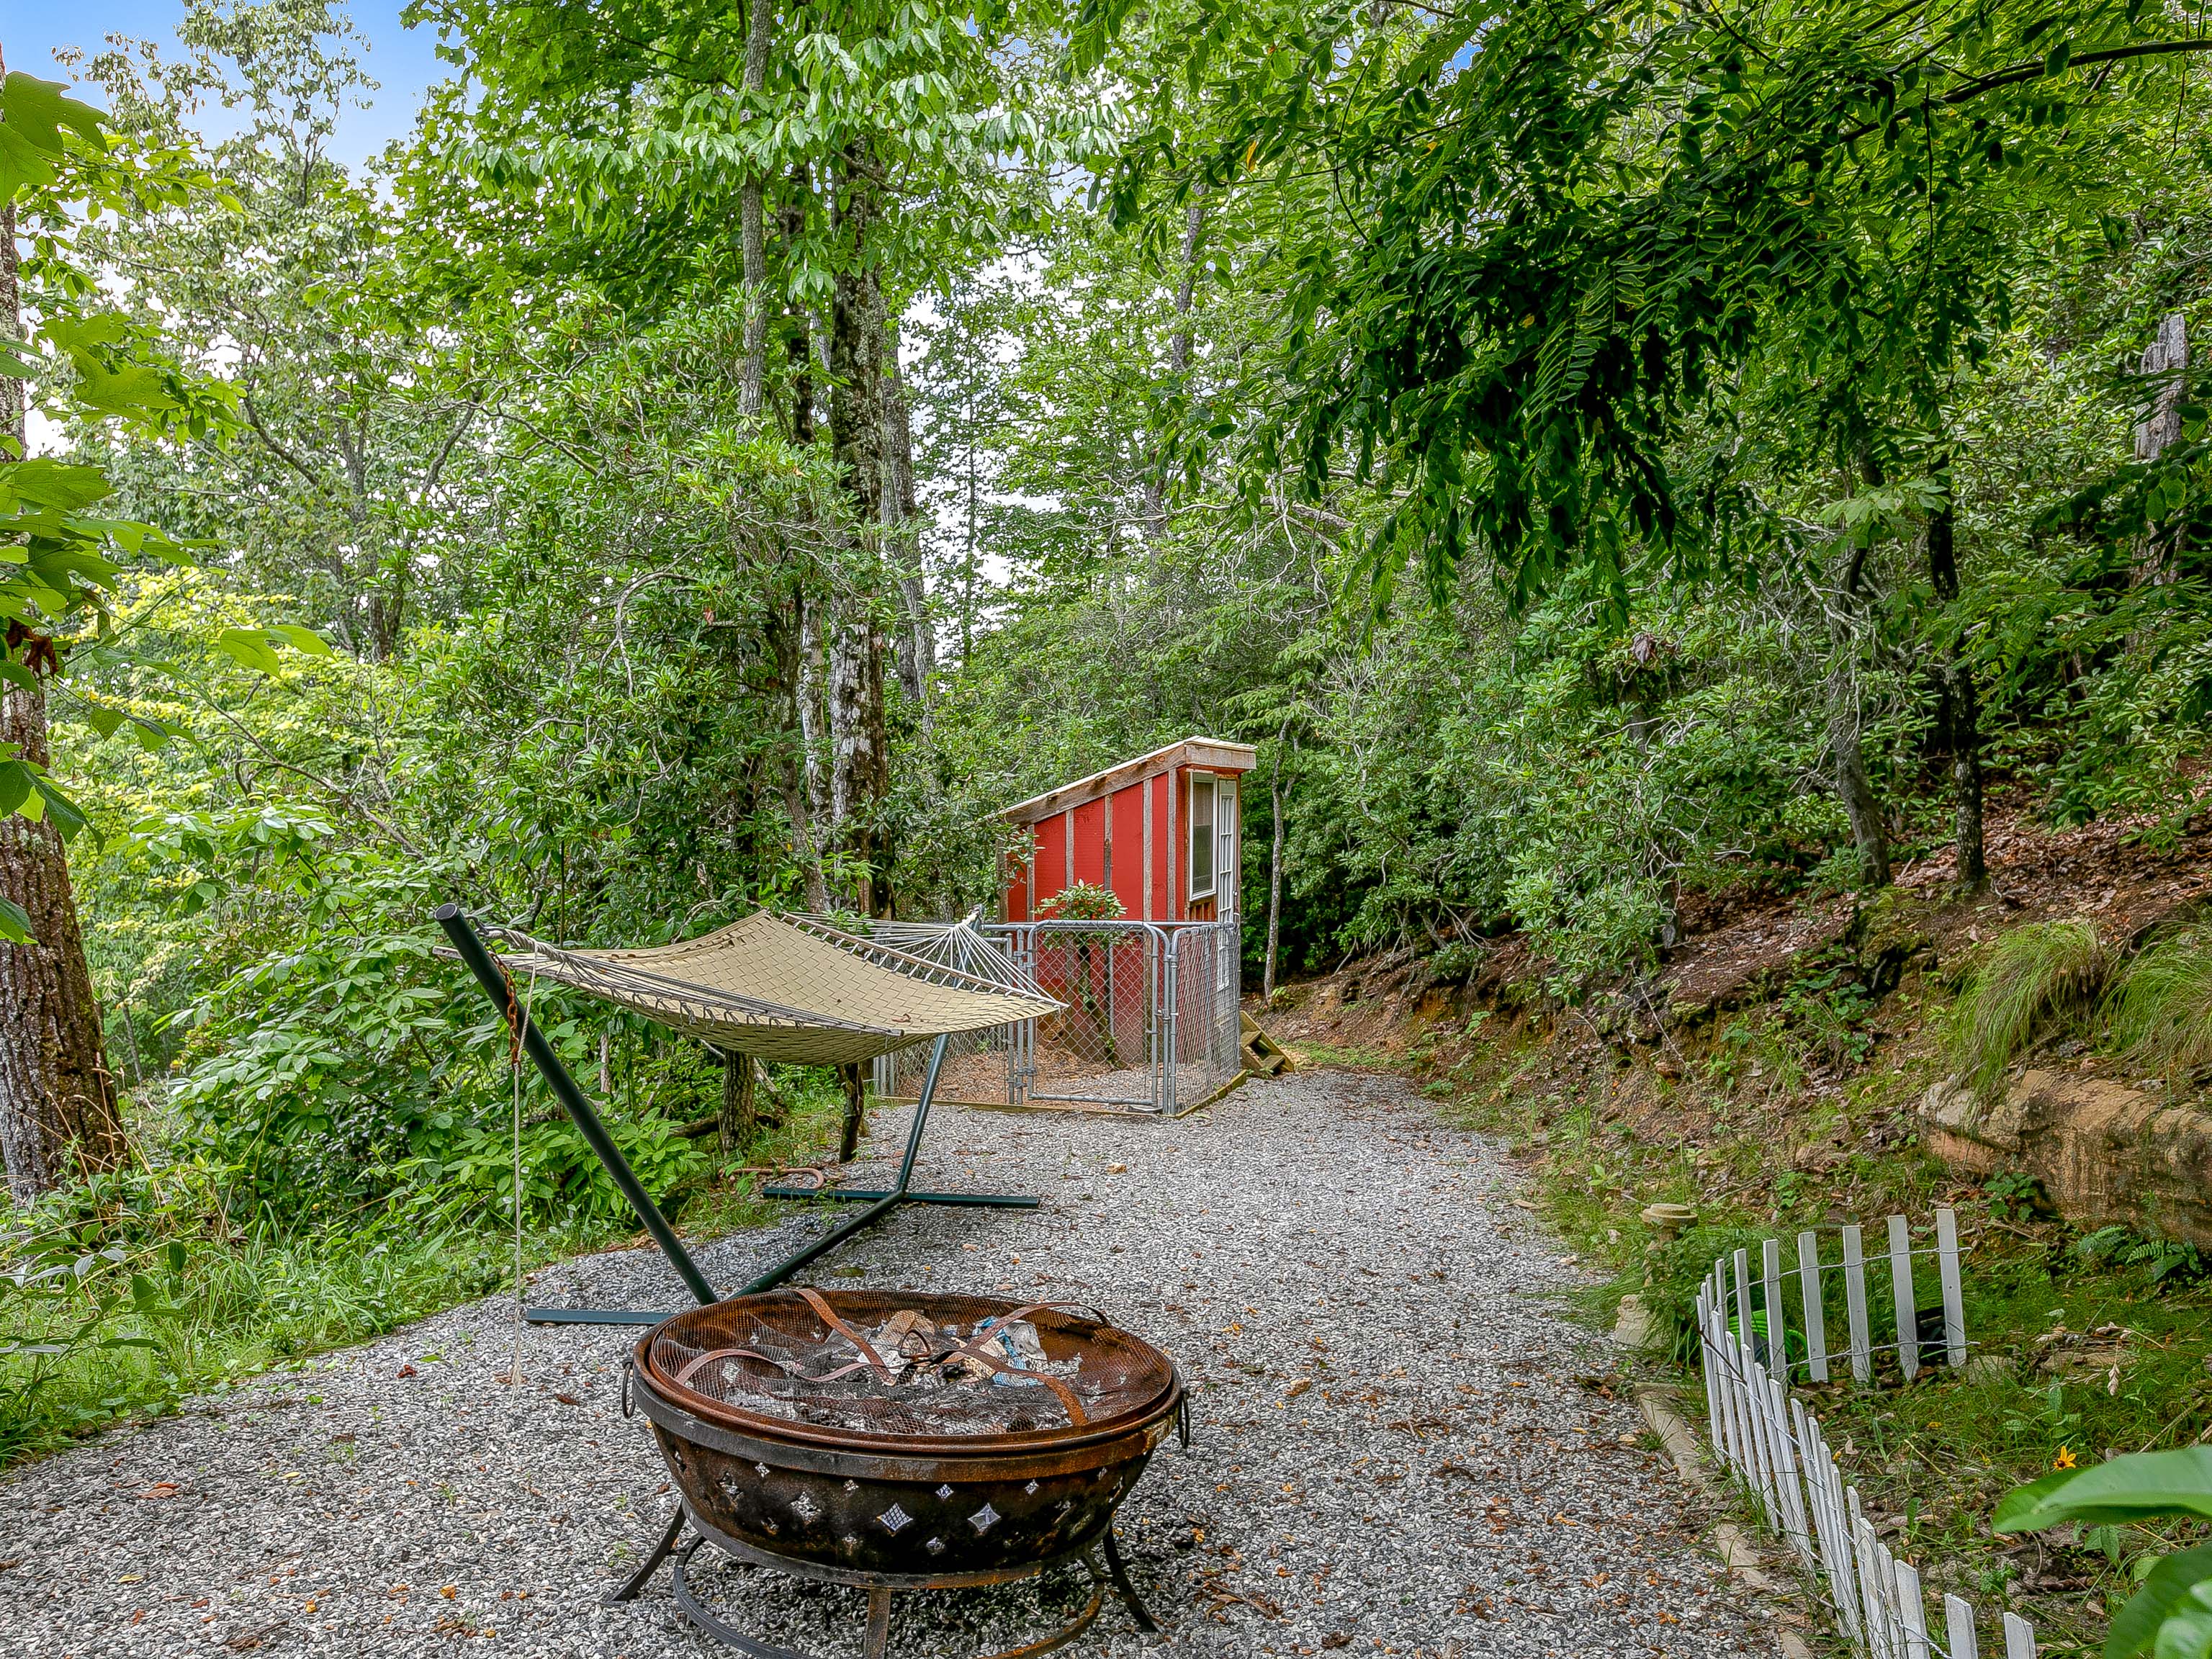 Chicken coop conveys. Relax on your private wooded getaway directly bordering Pisgah National Forest!...